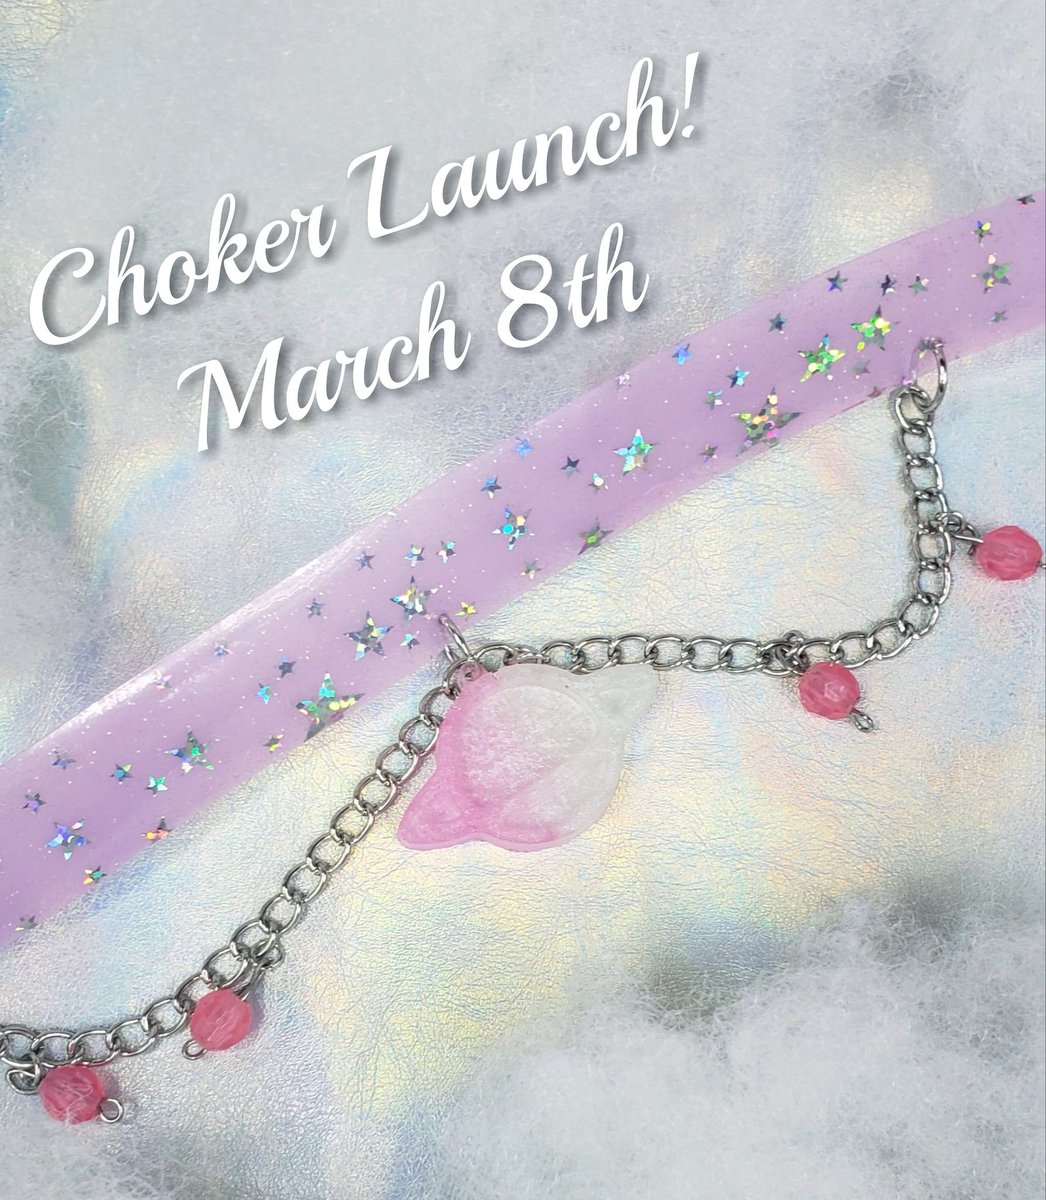 So excited to launch a whole collection of rad chokers next Monday! 🤗🌠

#smallbusiness #resinart #handmadechoker